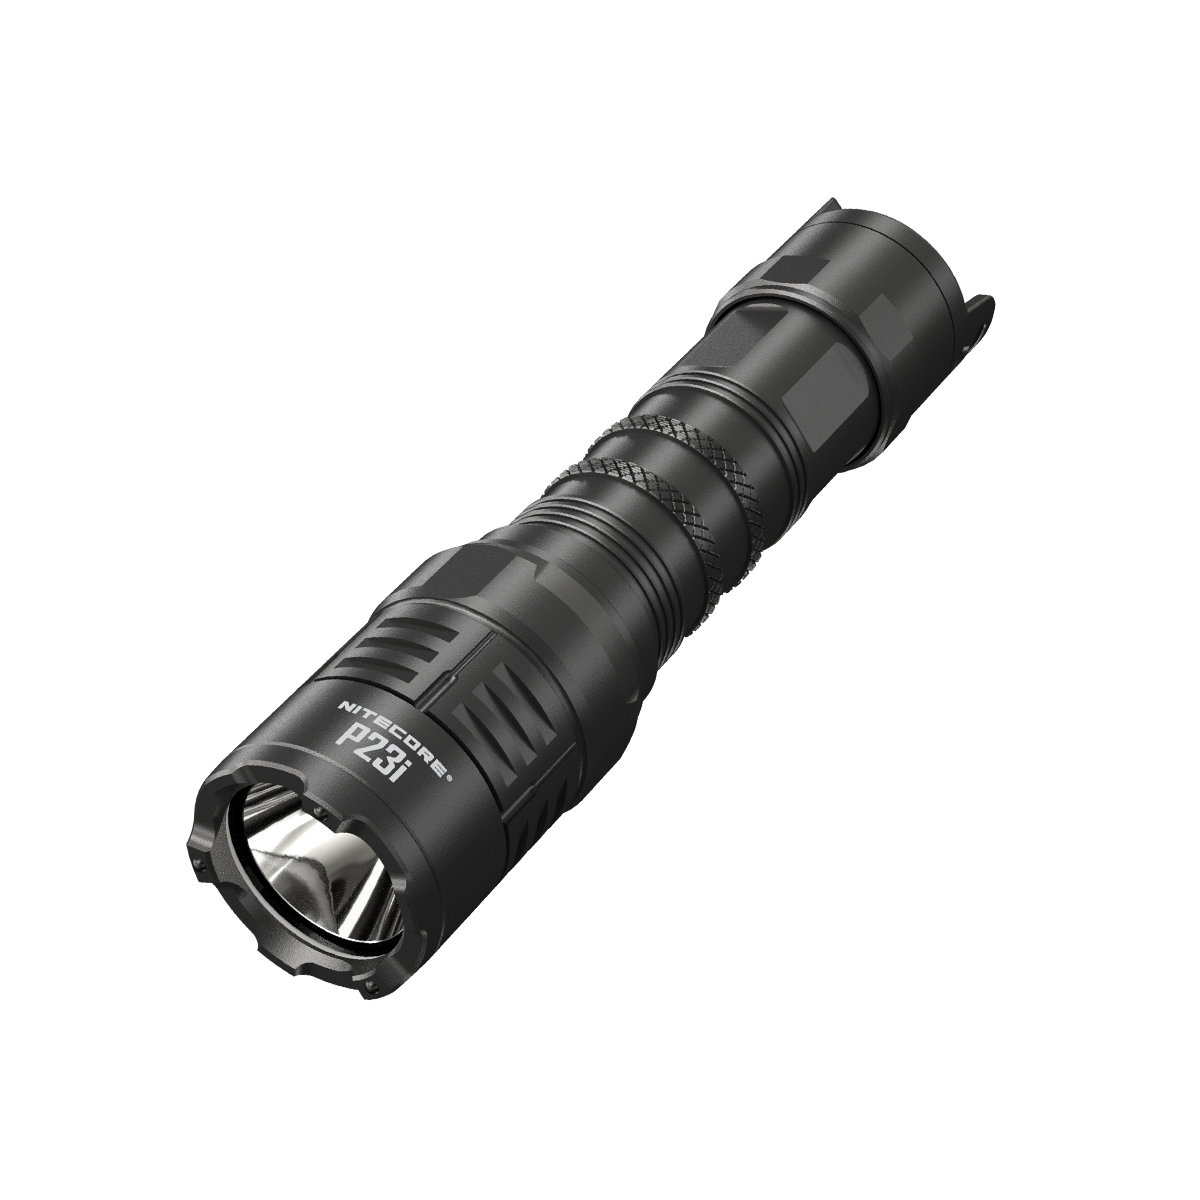 NITECORE P23i 3000LM High Lumen LED Tactical Flashlight USB Rechargeable LED Torch For Outdoor Hunting Fishing Camping